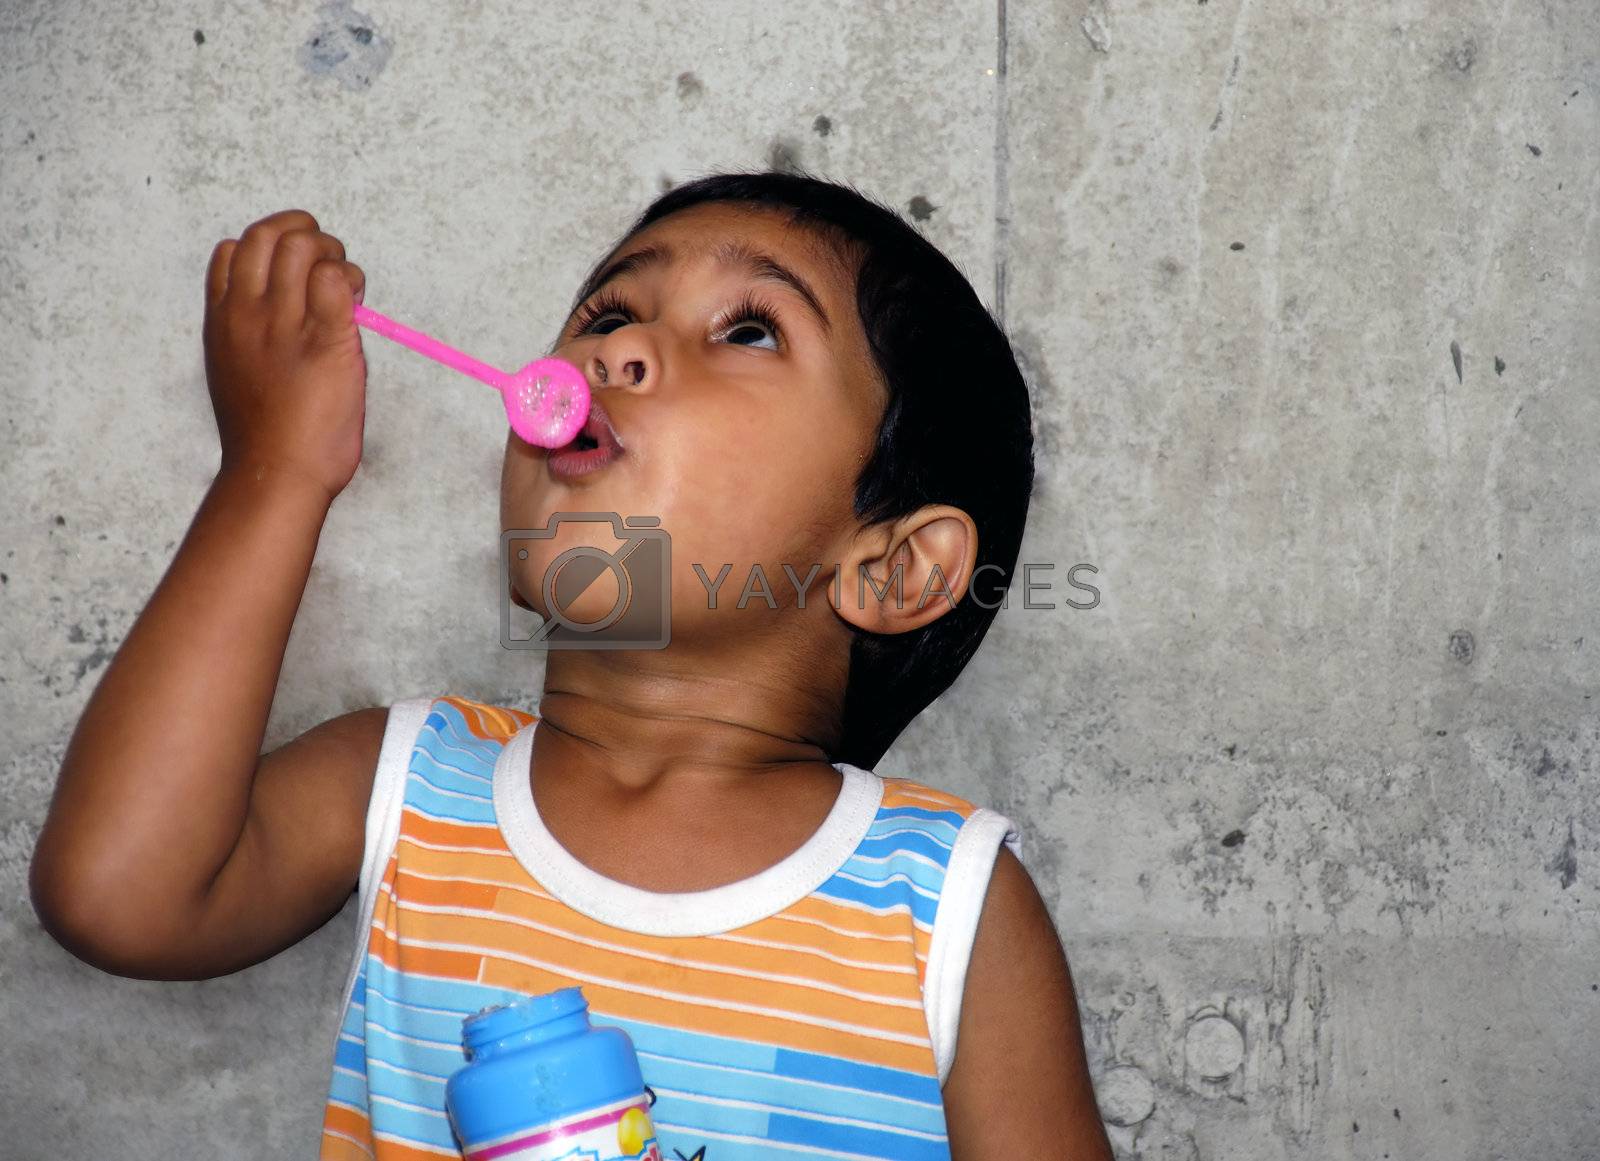 Royalty free image of Blowing bubbles by pazham